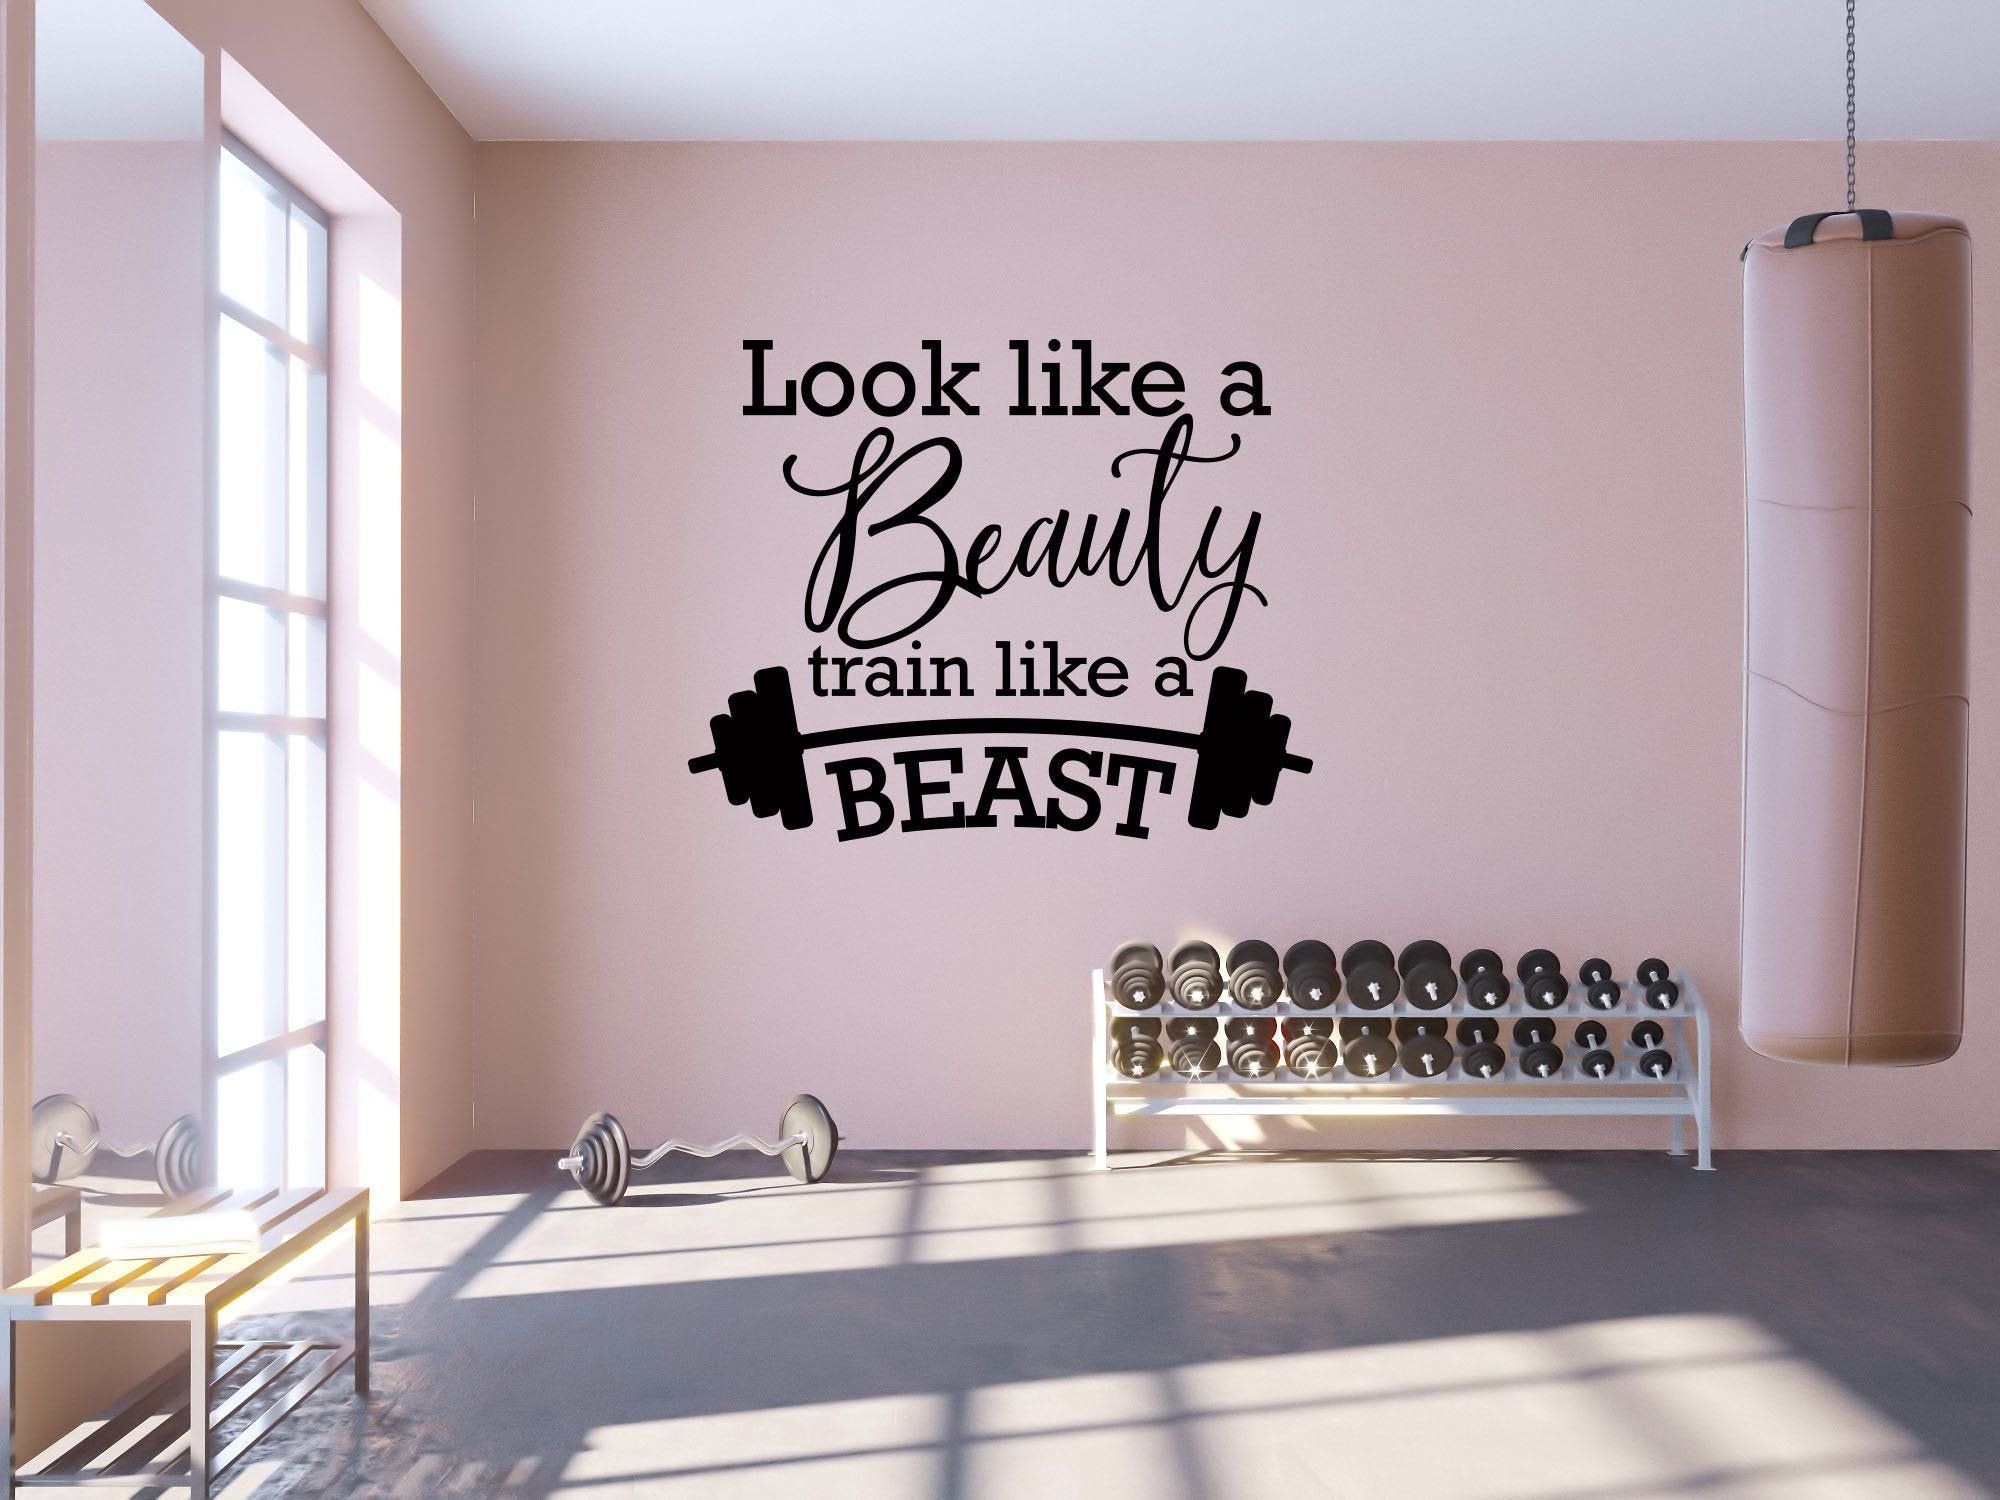 Gym Wall Decal Look Like A Beauty Train Like A Beast | Motivational Quotes, Sports Wall Quotes, Gym Wall Decor, Workout Quote Wall Decal SB7 - Gym Wall Decal Look Like A Beauty Train Like A Beast | Motivational Quotes, Sports Wall Quotes, Gym Wall Decor, Workout Quote Wall Decal SB7 -   16 fitness Room signs ideas